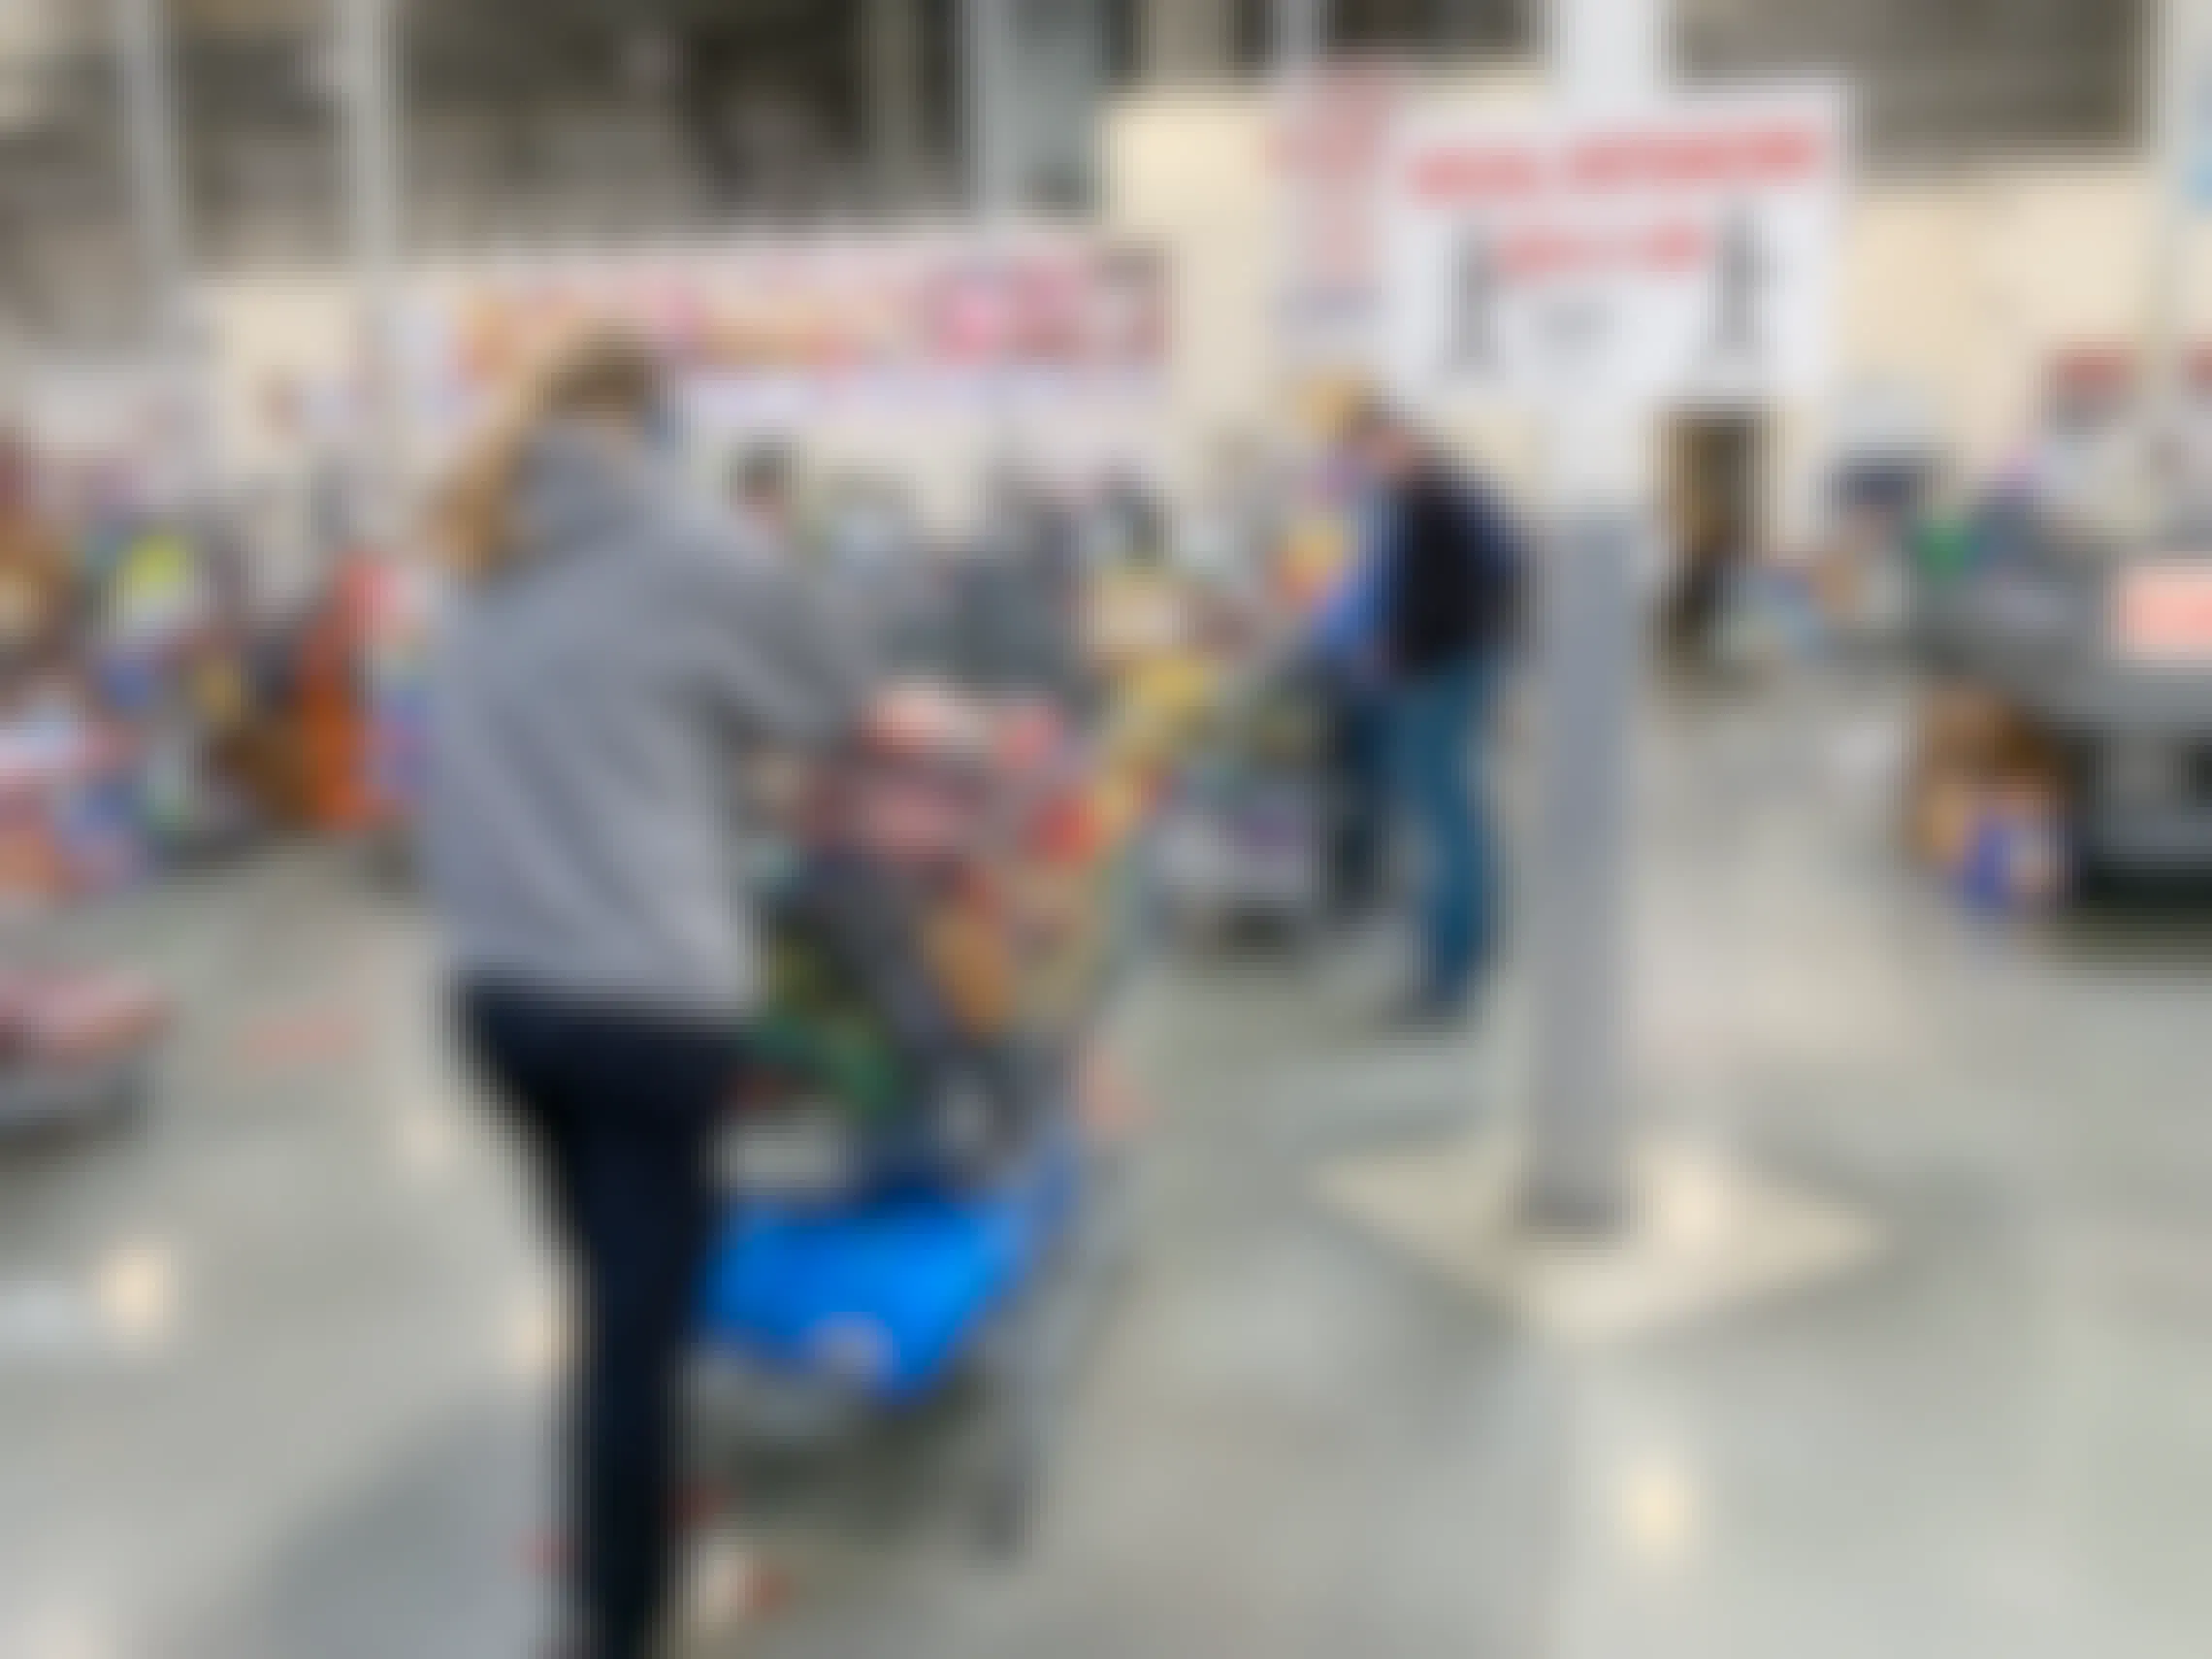 Costco checkout line with social distancing sign.